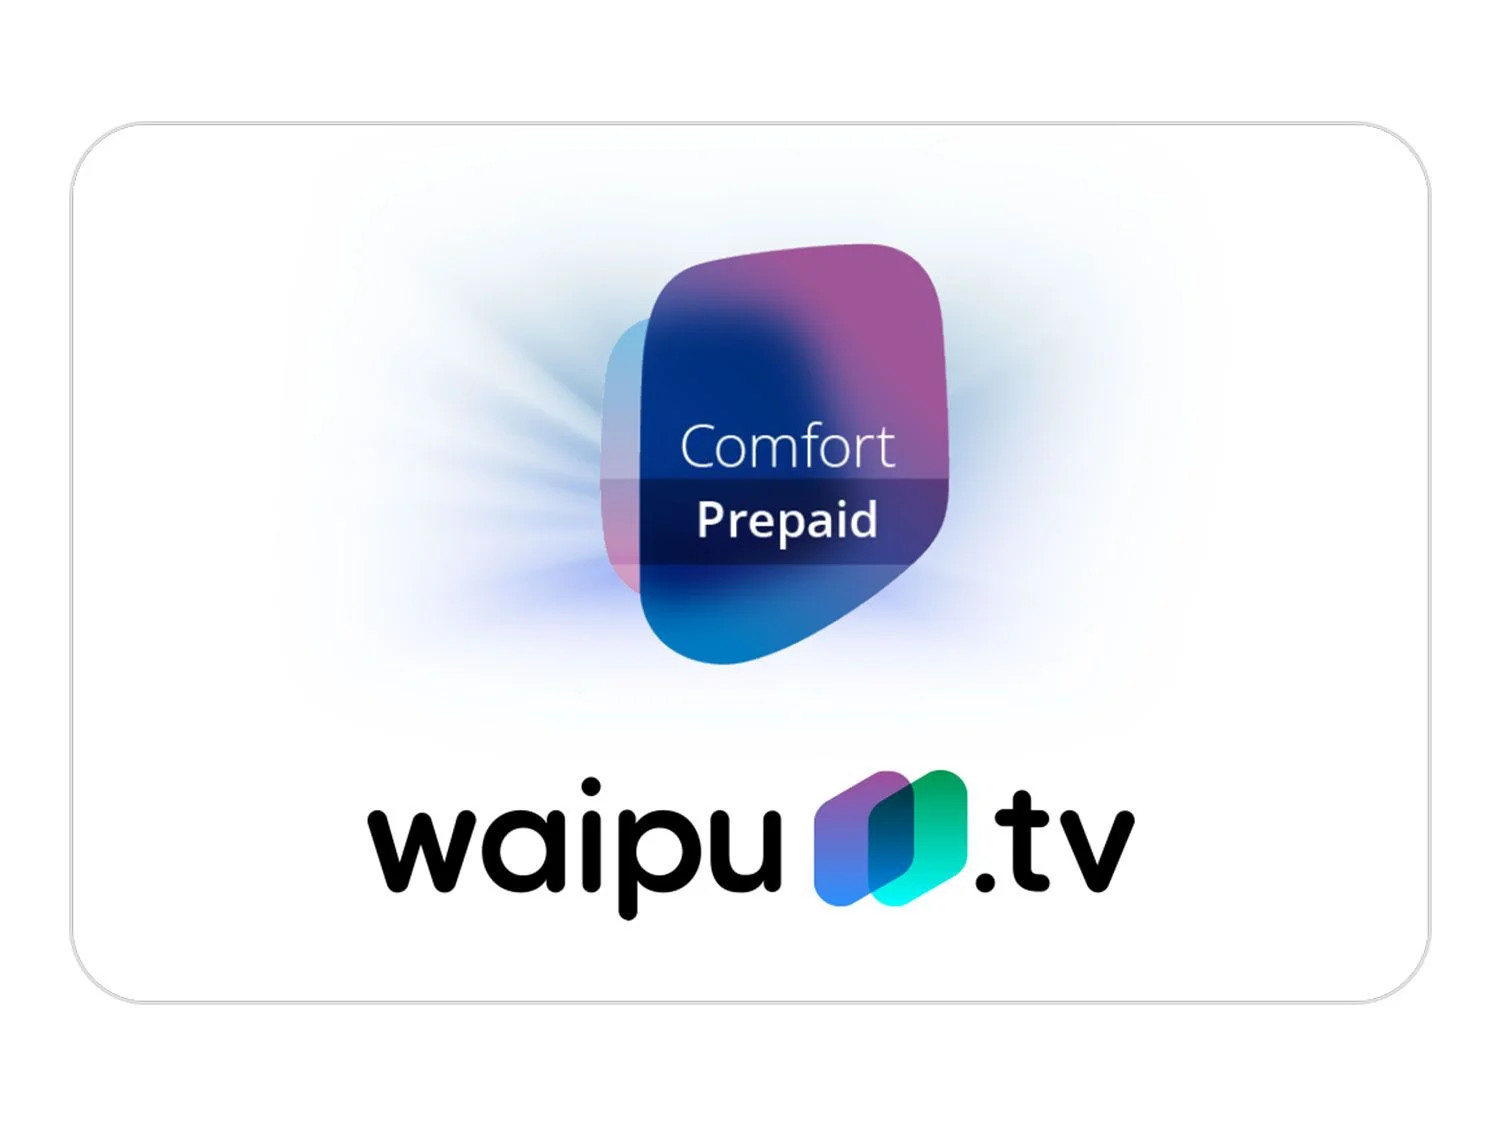 [$ 27.12] Waipu TV - 6 Months Comfort Subscription DE (ONLY FOR NEW ACCOUNTS)